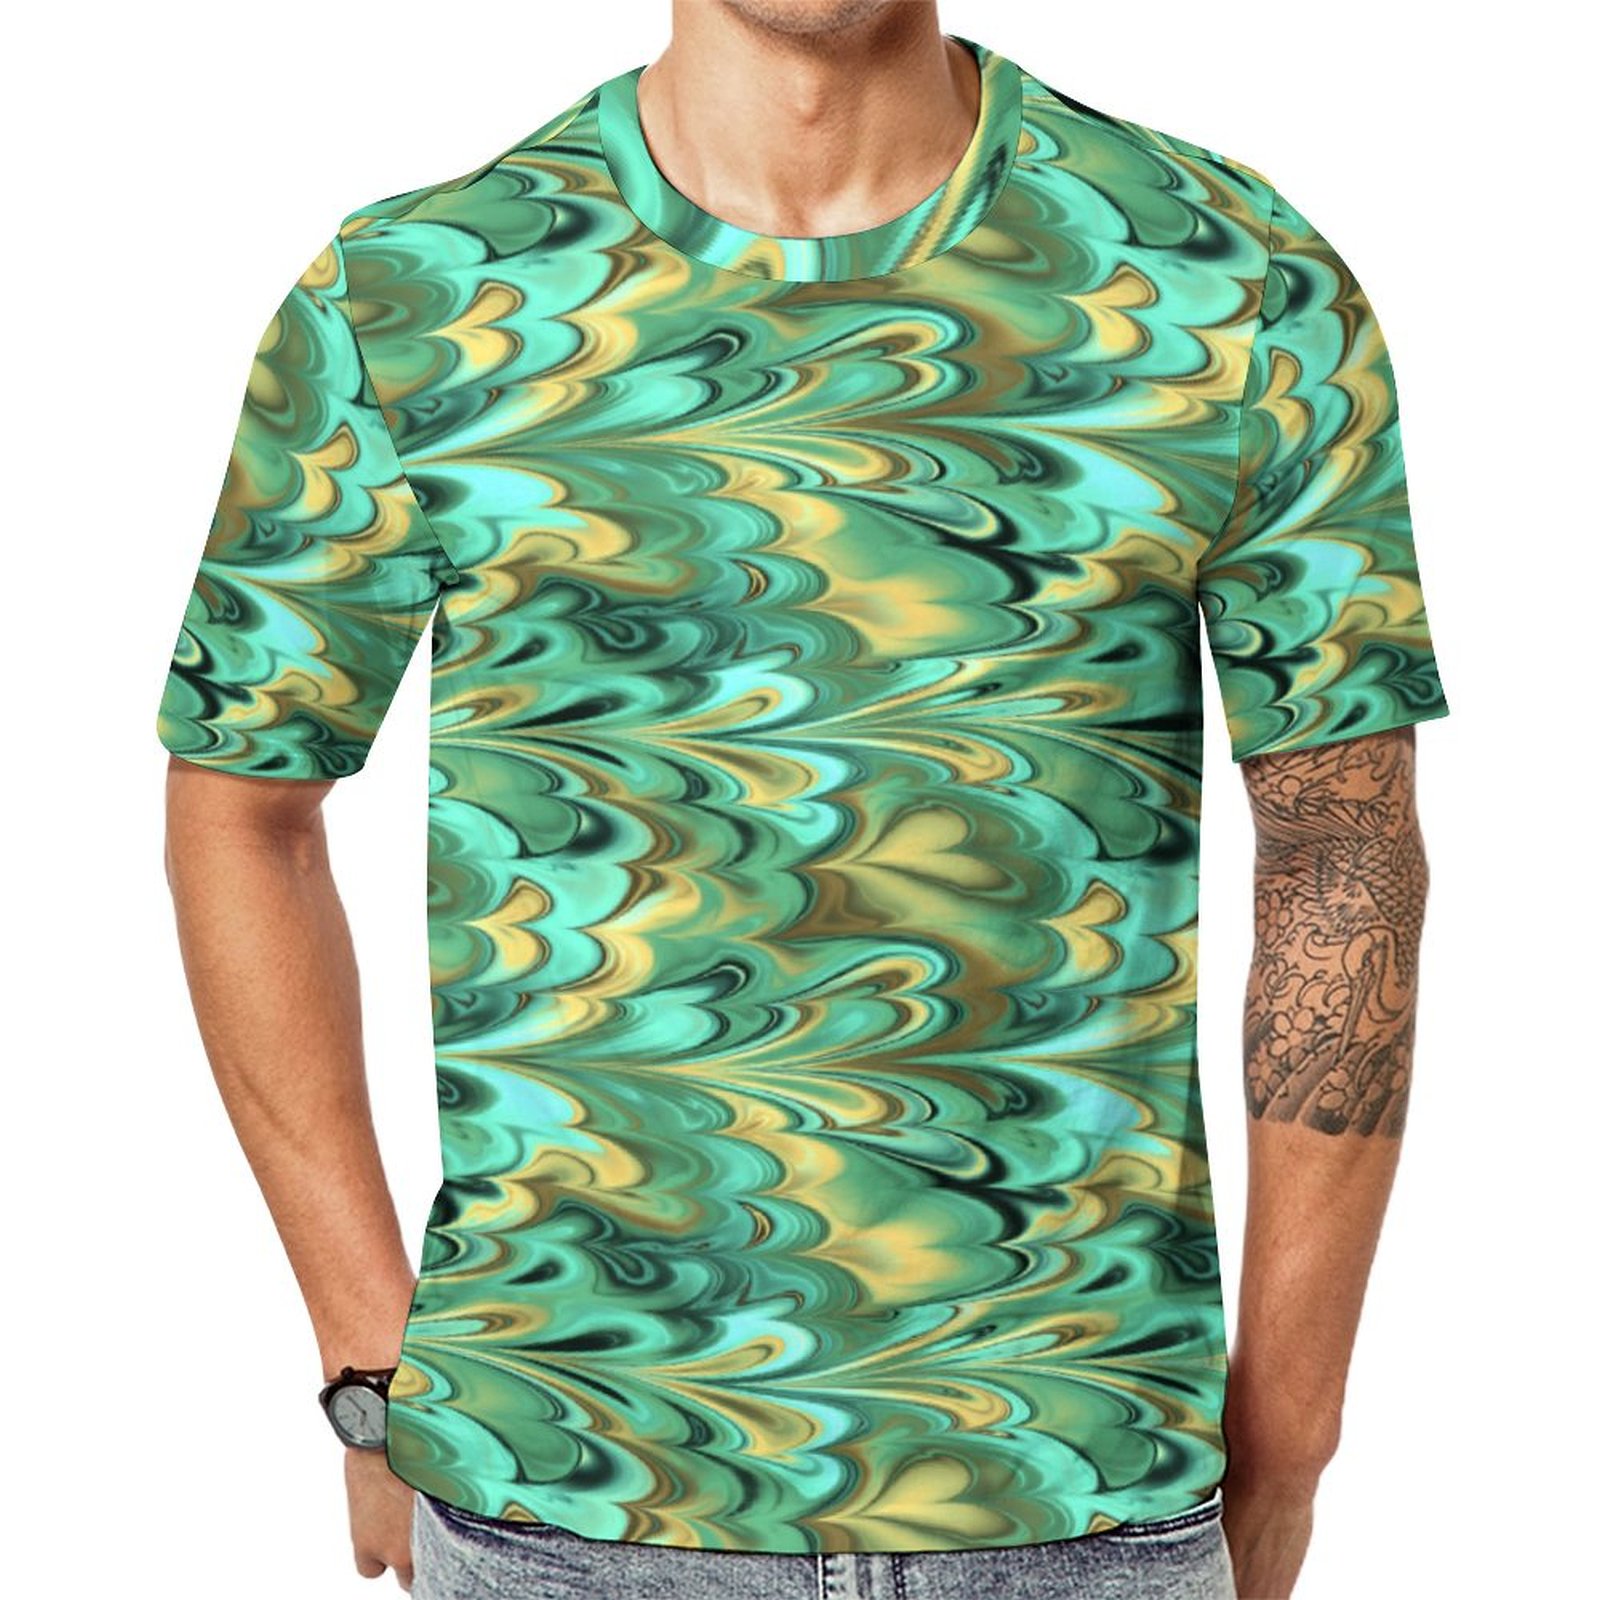 Gold Green Turquoise Marbled Short Sleeve Print Unisex Tshirt Summer Casual Tees for Men and Women Coolcoshirts